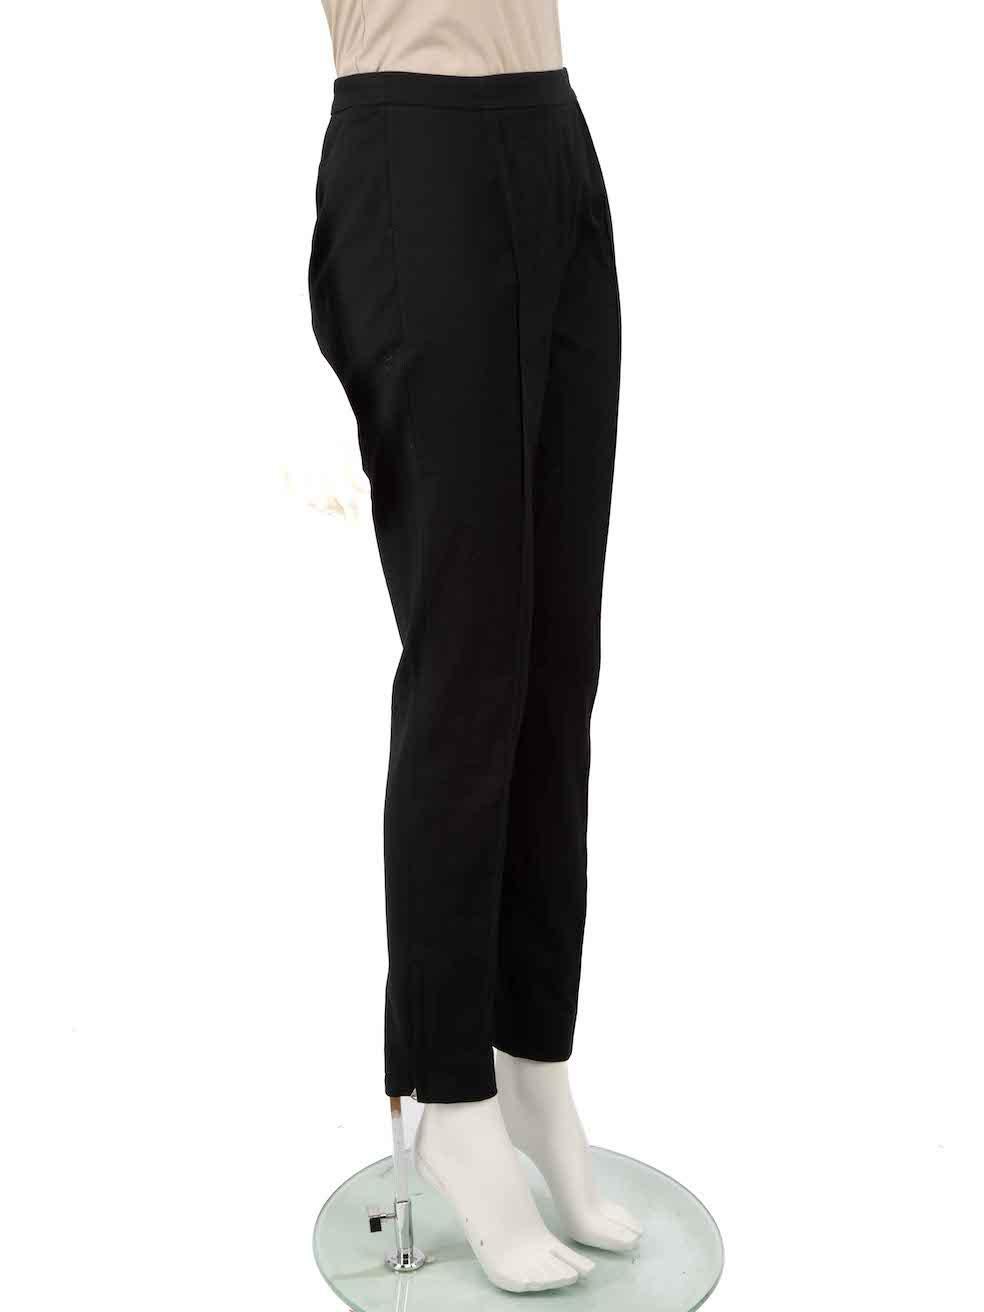 CONDITION is Very good. Hardly any visible wear to trousers is evident on this used Dolce & Gabbana designer resale item.
 
 
 
 Details
 
 
 Black
 
 Cotton
 
 Trousers
 
 Skinny fit
 
 High rise
 
 Side zip and button fastening
 
 Zipped cuffs
 
